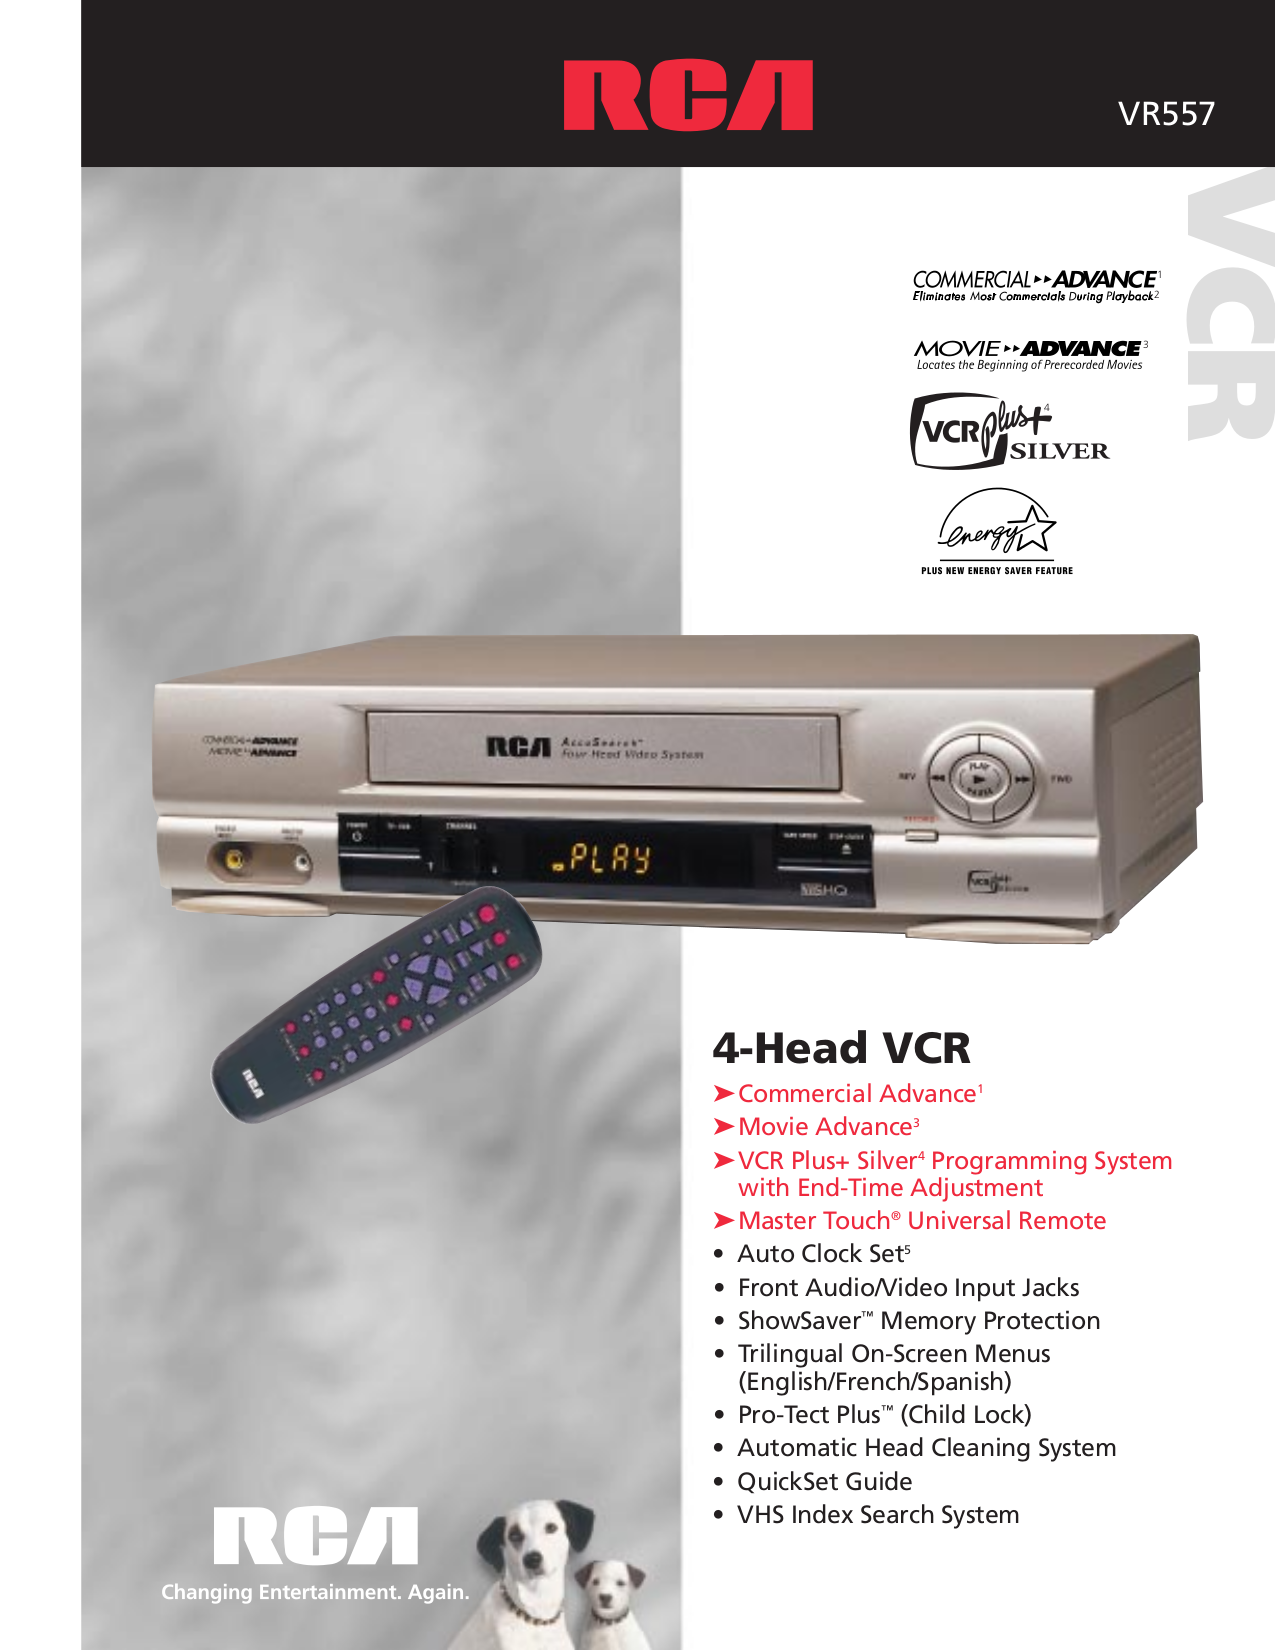 Download free pdf for RCA VR557 VCR manual